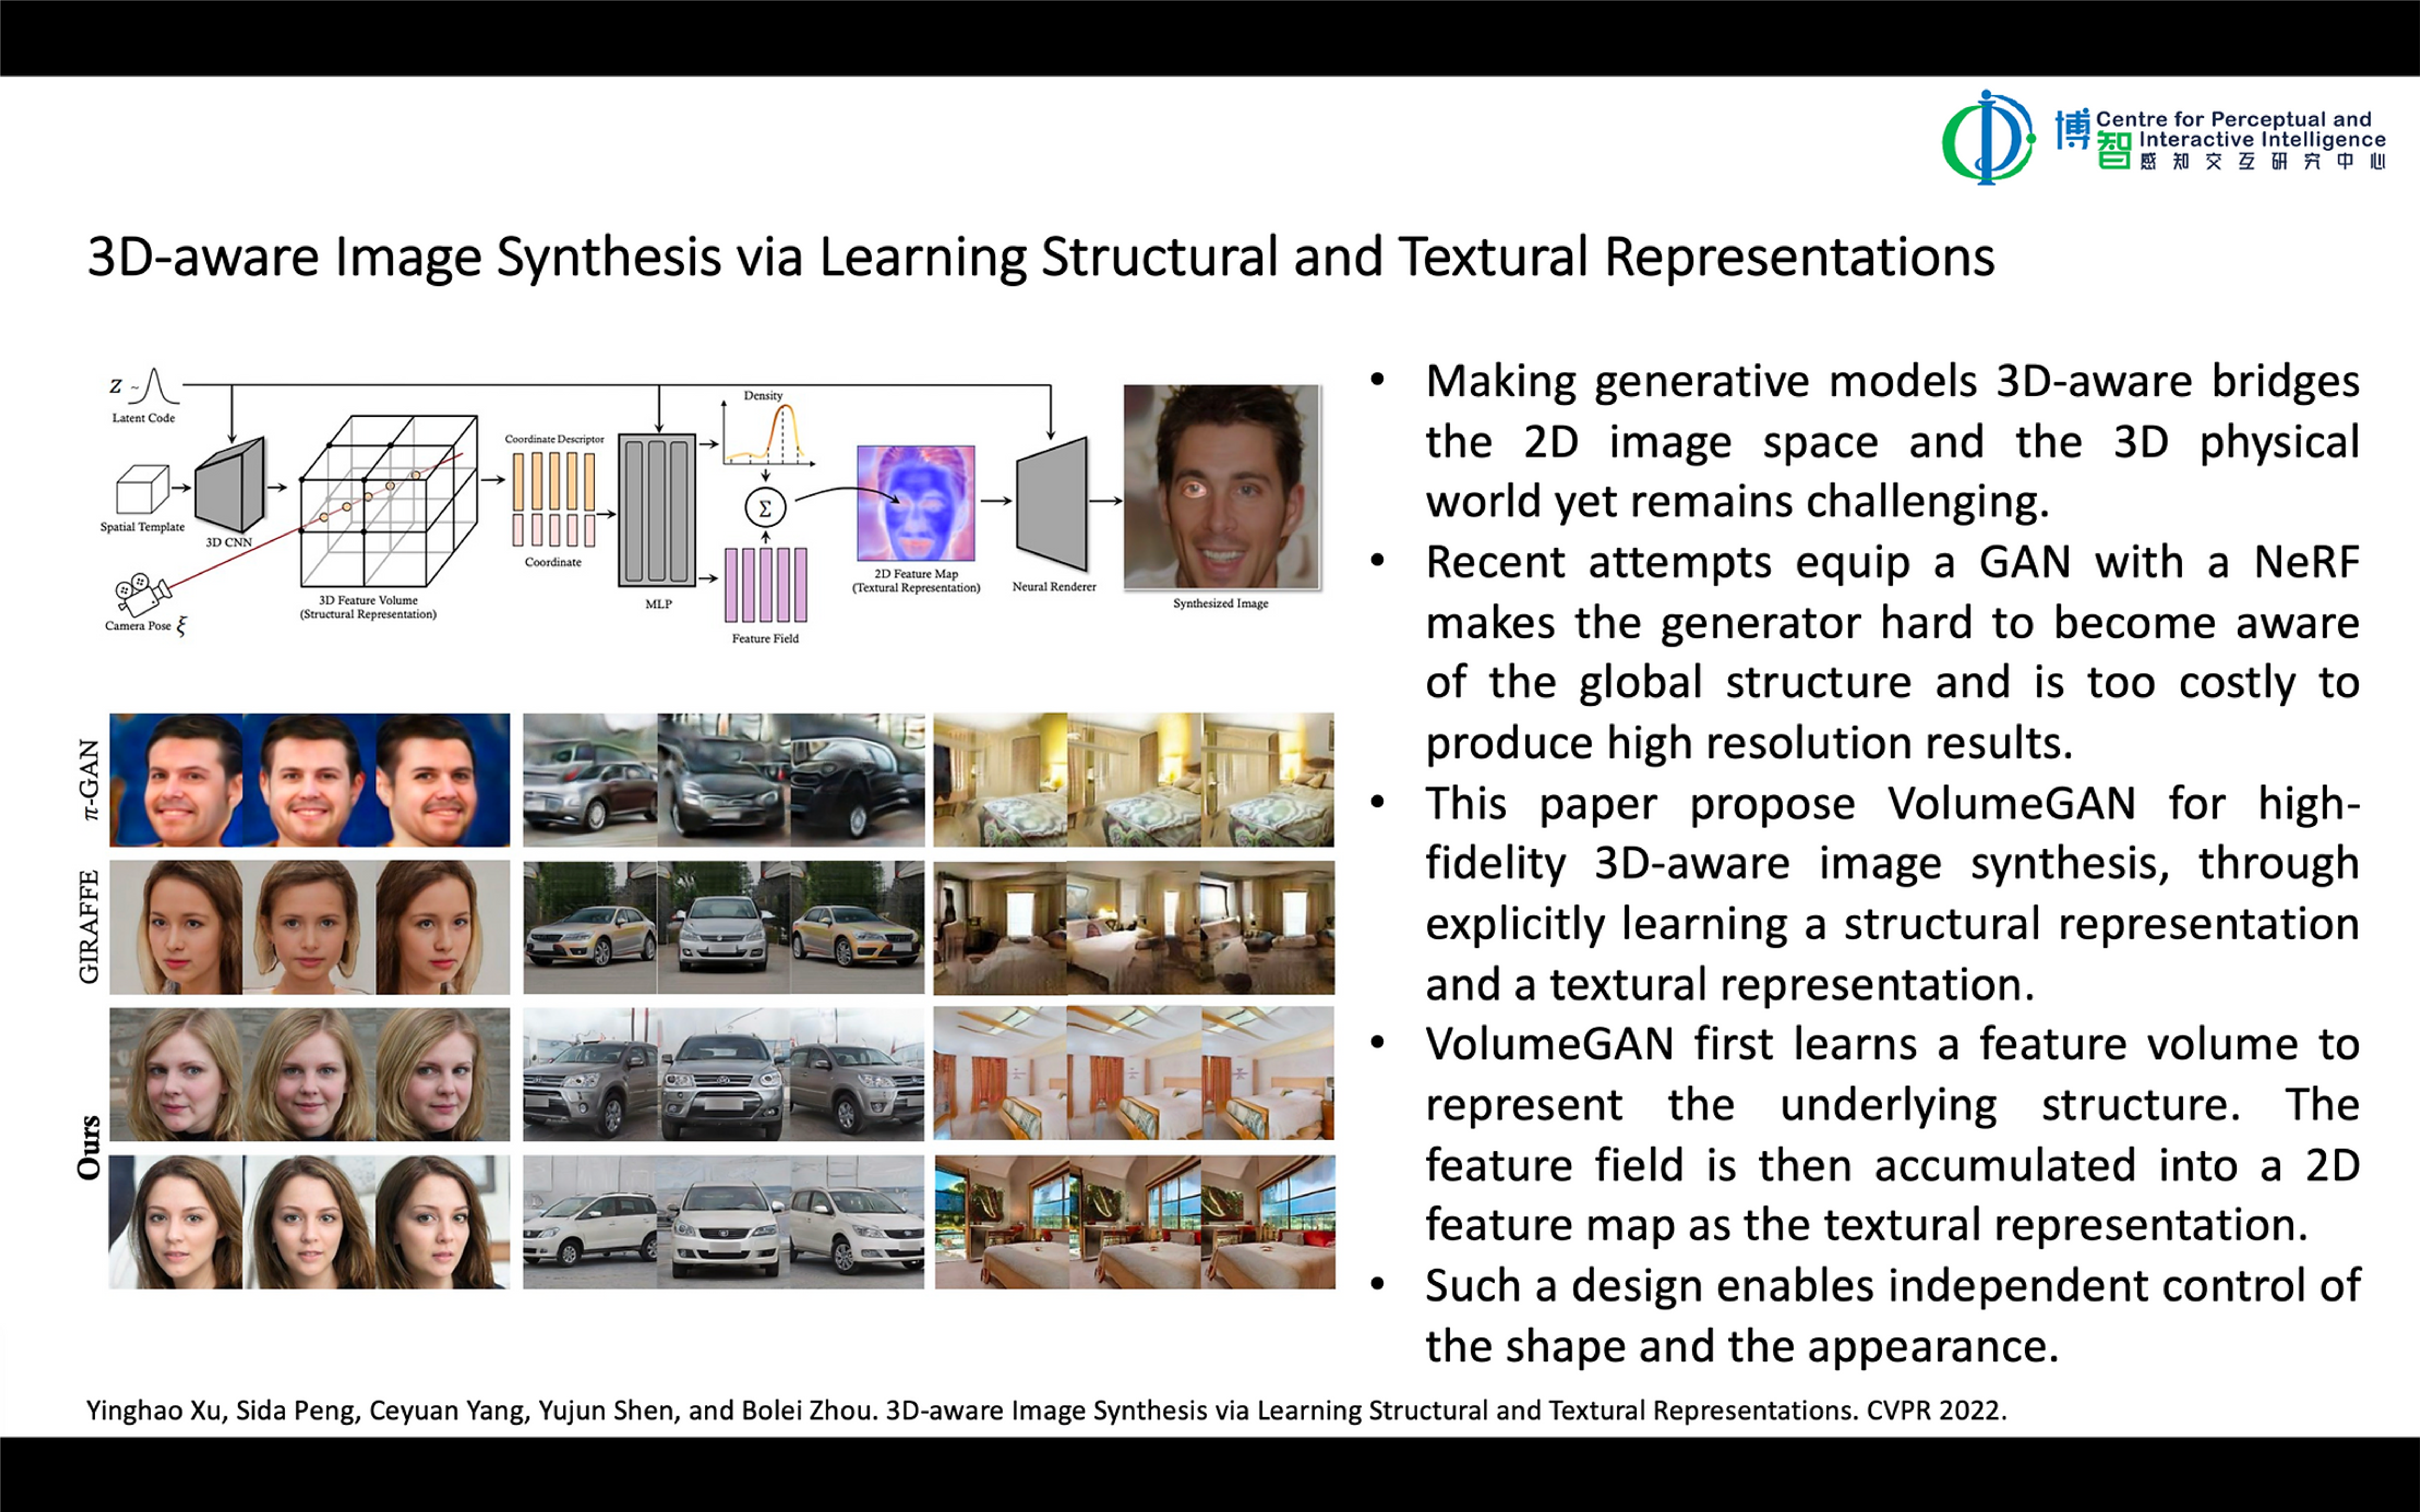 3D-aware Image Synthesis via Learning Structural and Texture Representations